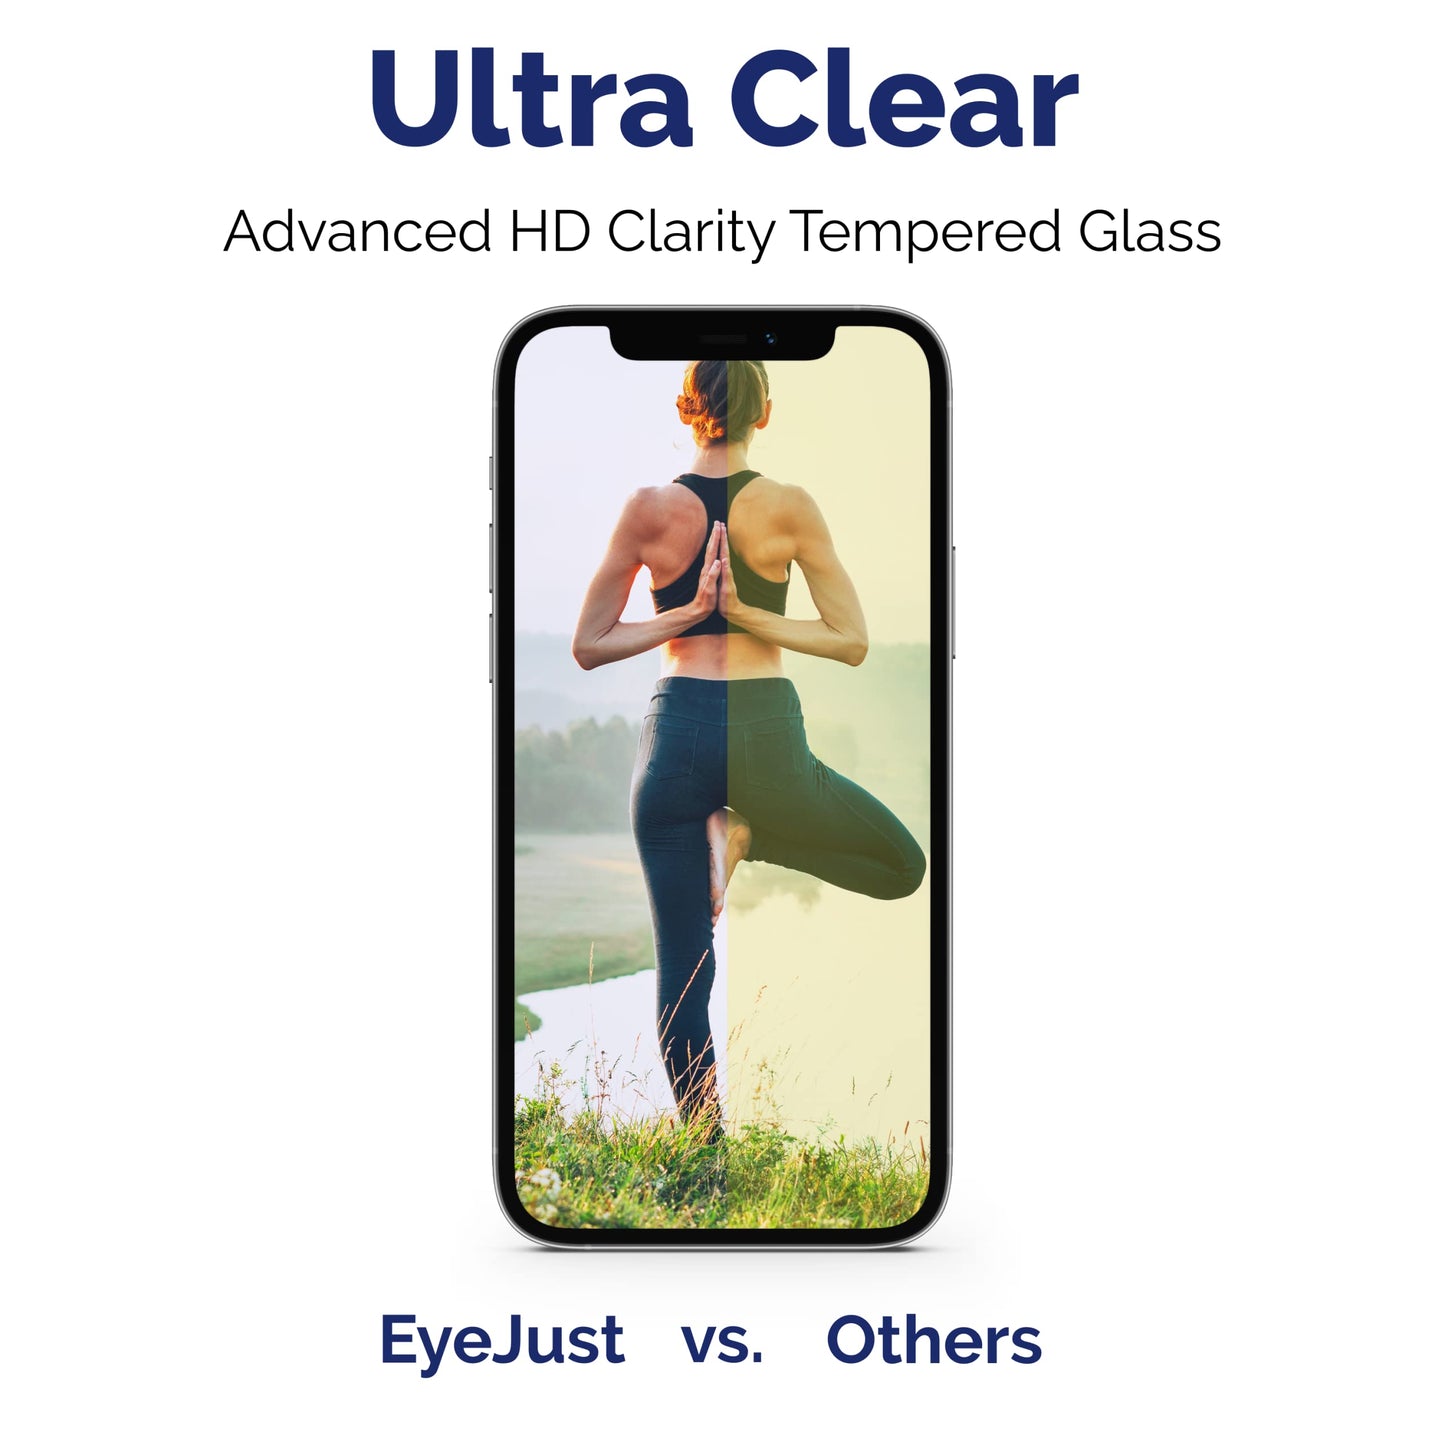 EyeJust Blue Light Blocking Screen Protector, Compatible with XS Max /11 Pro Max, Anti-UV Eye Protection, Relieve Eye Strain, Premium Full Screen Coverage